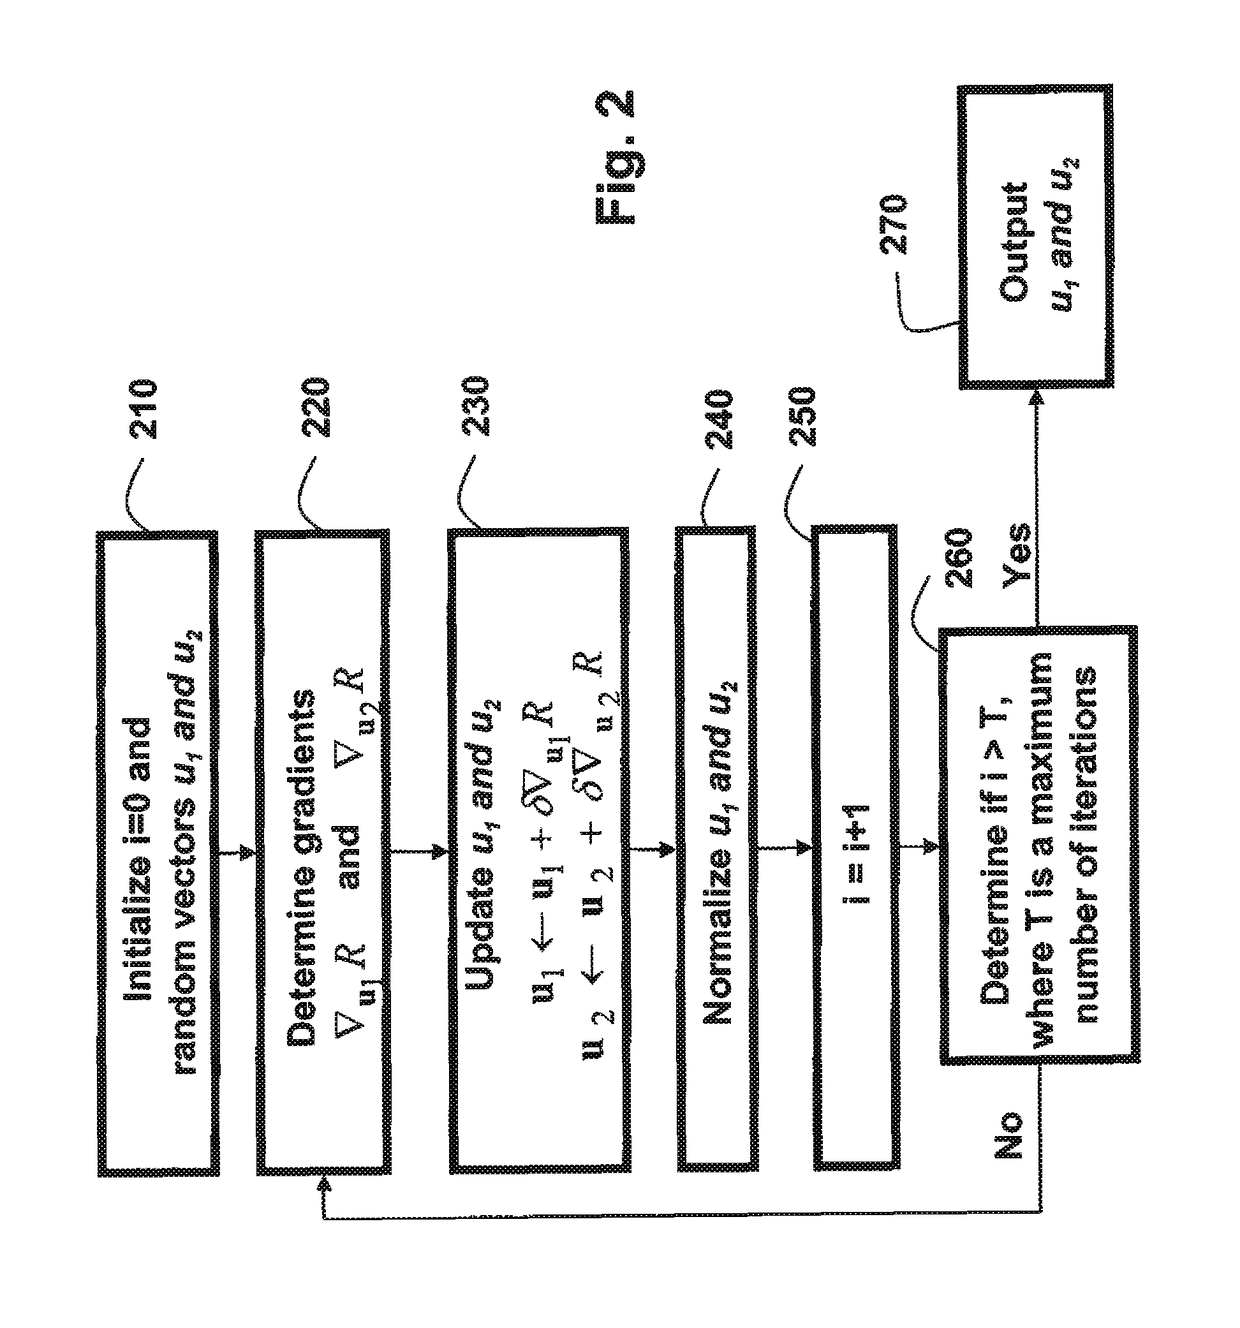 Method for reducing interference in multi-cell multi-user wireless networks